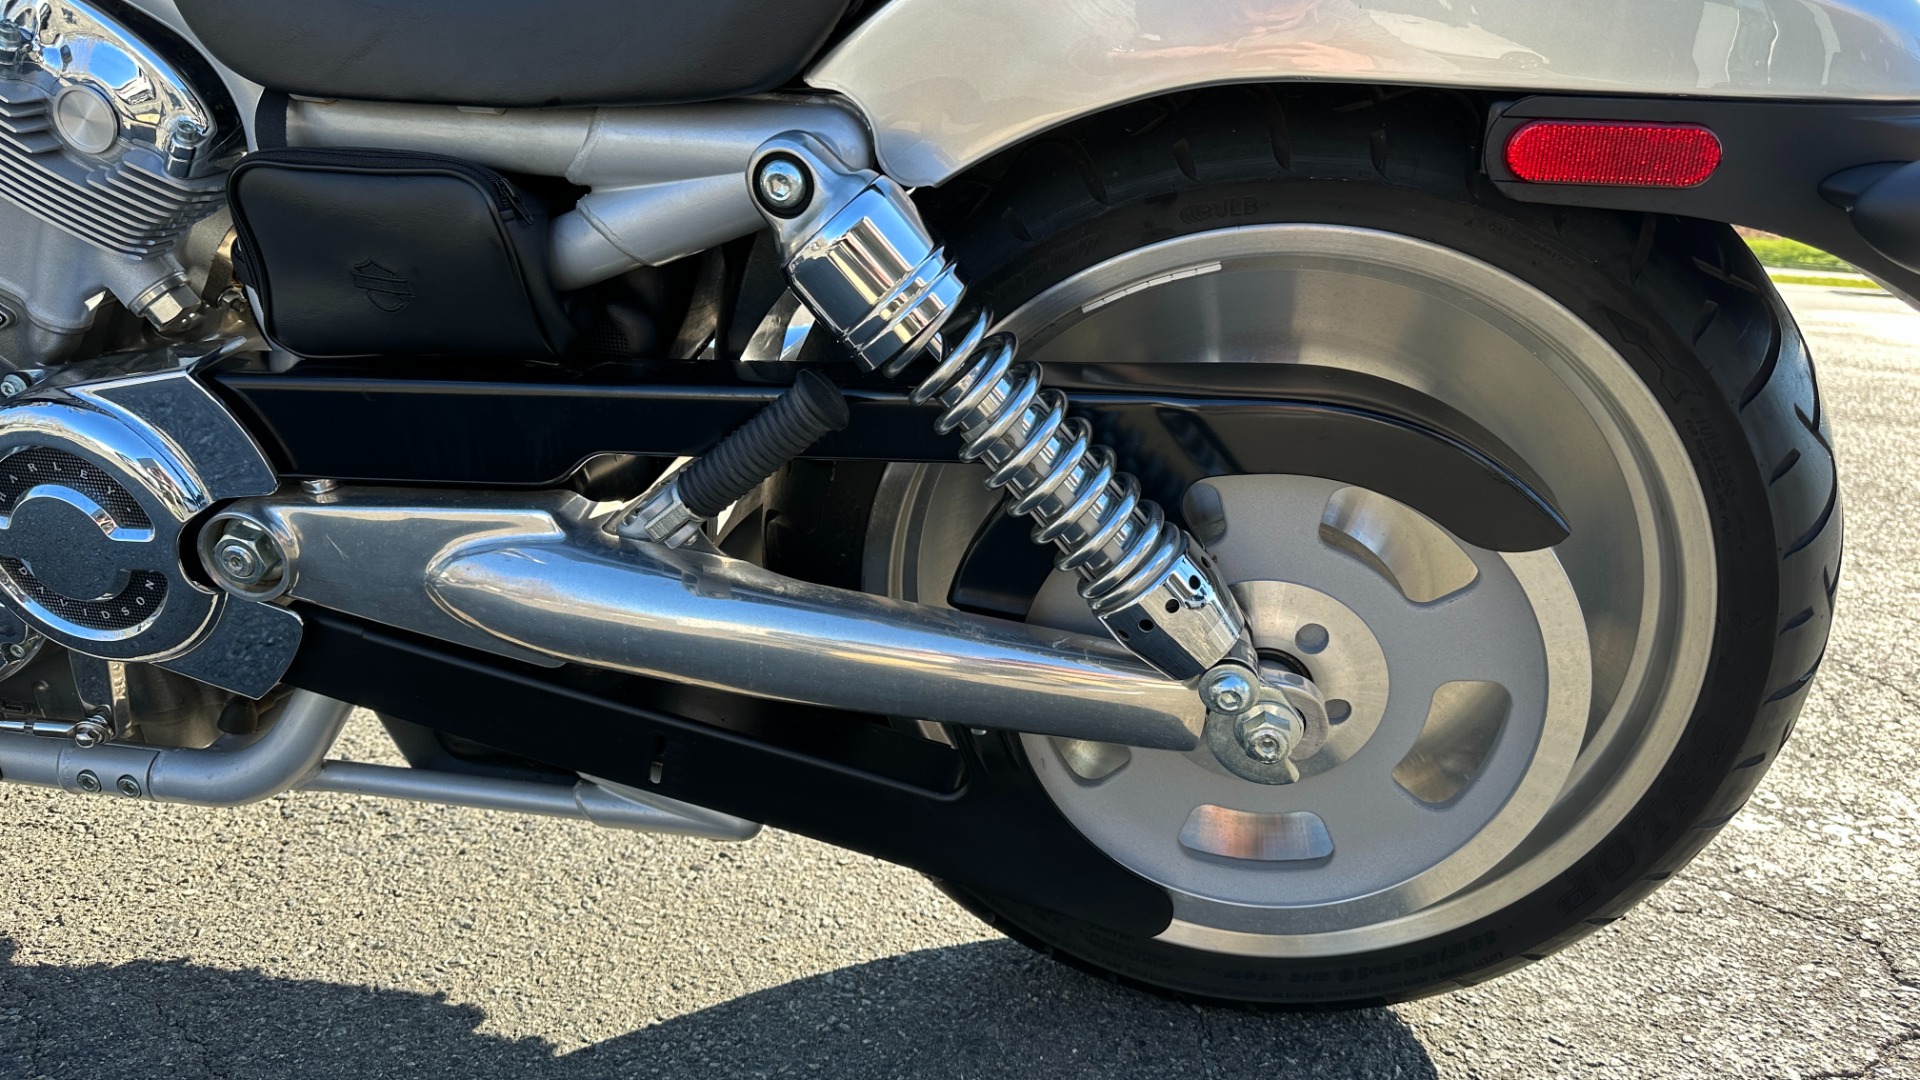 Used 2003 Harley Davidson V Rod ANNIVERSARY EDITION / 1130CC ENGINE / BREMBO BRAKES / VORTEX AIR SCOOPS for sale $7,995 at Formula Imports in Charlotte NC 28227 6